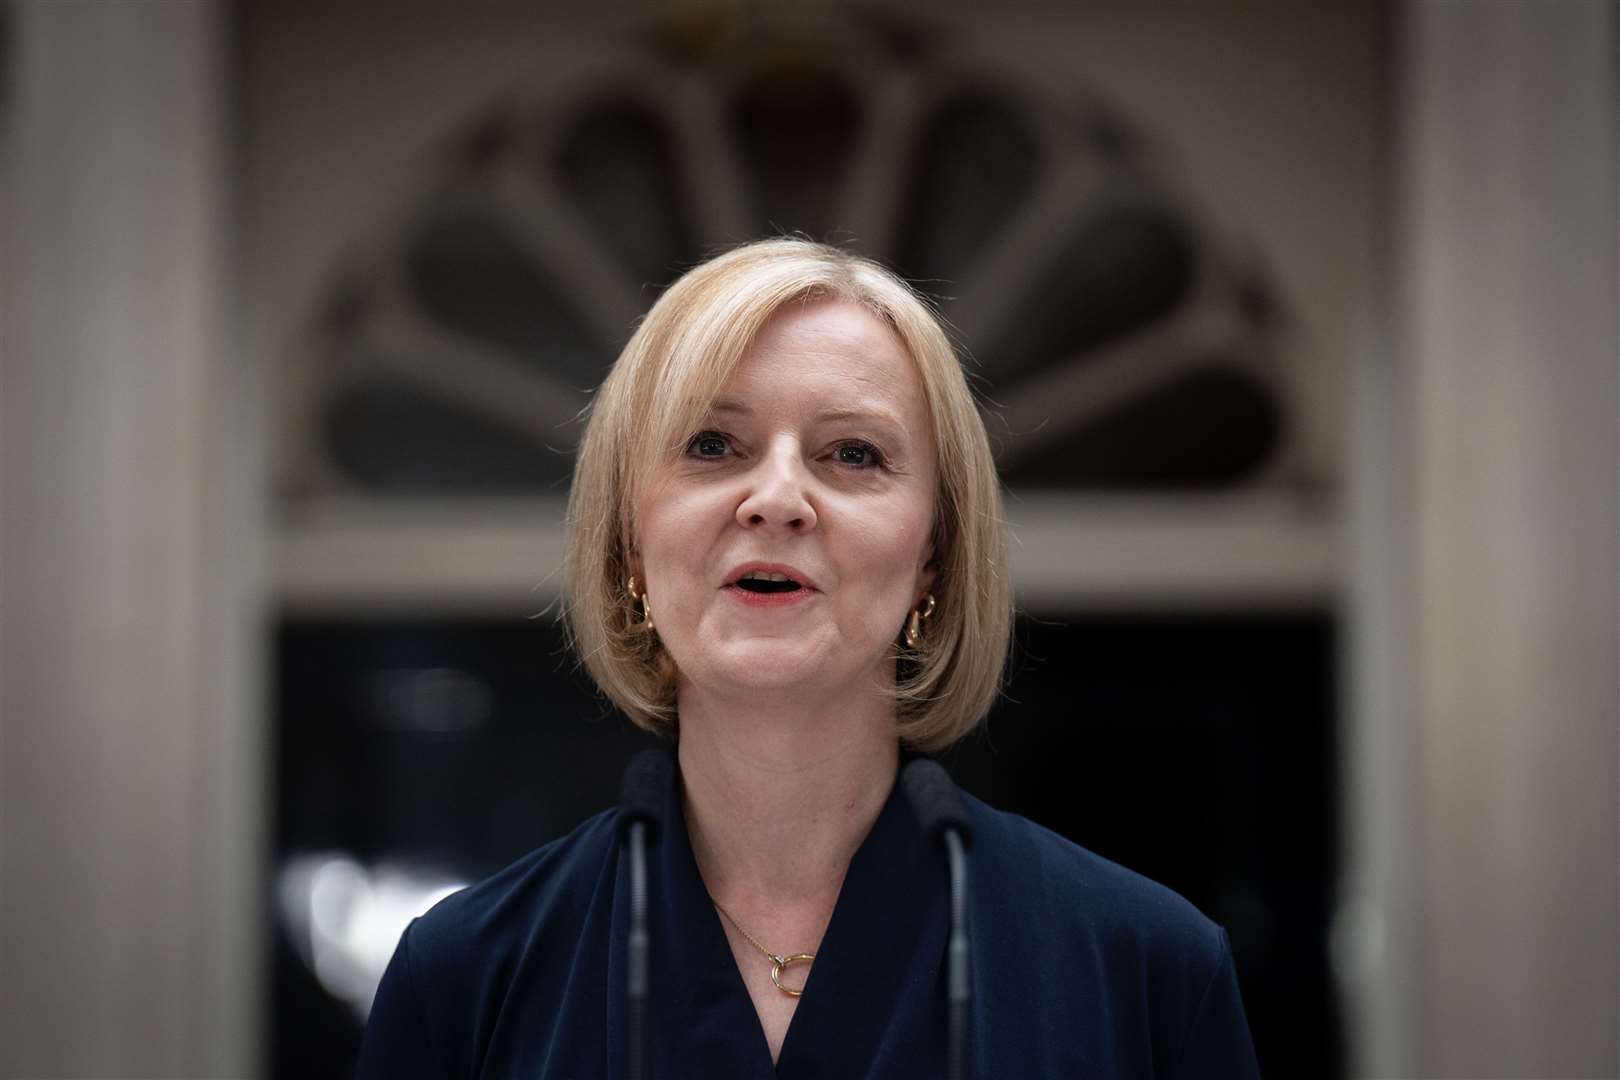 New Prime Minister Liz Truss is expected to announce cost-of-living support on Thursday in the House of Commons (Stefan Rousseau/PA)